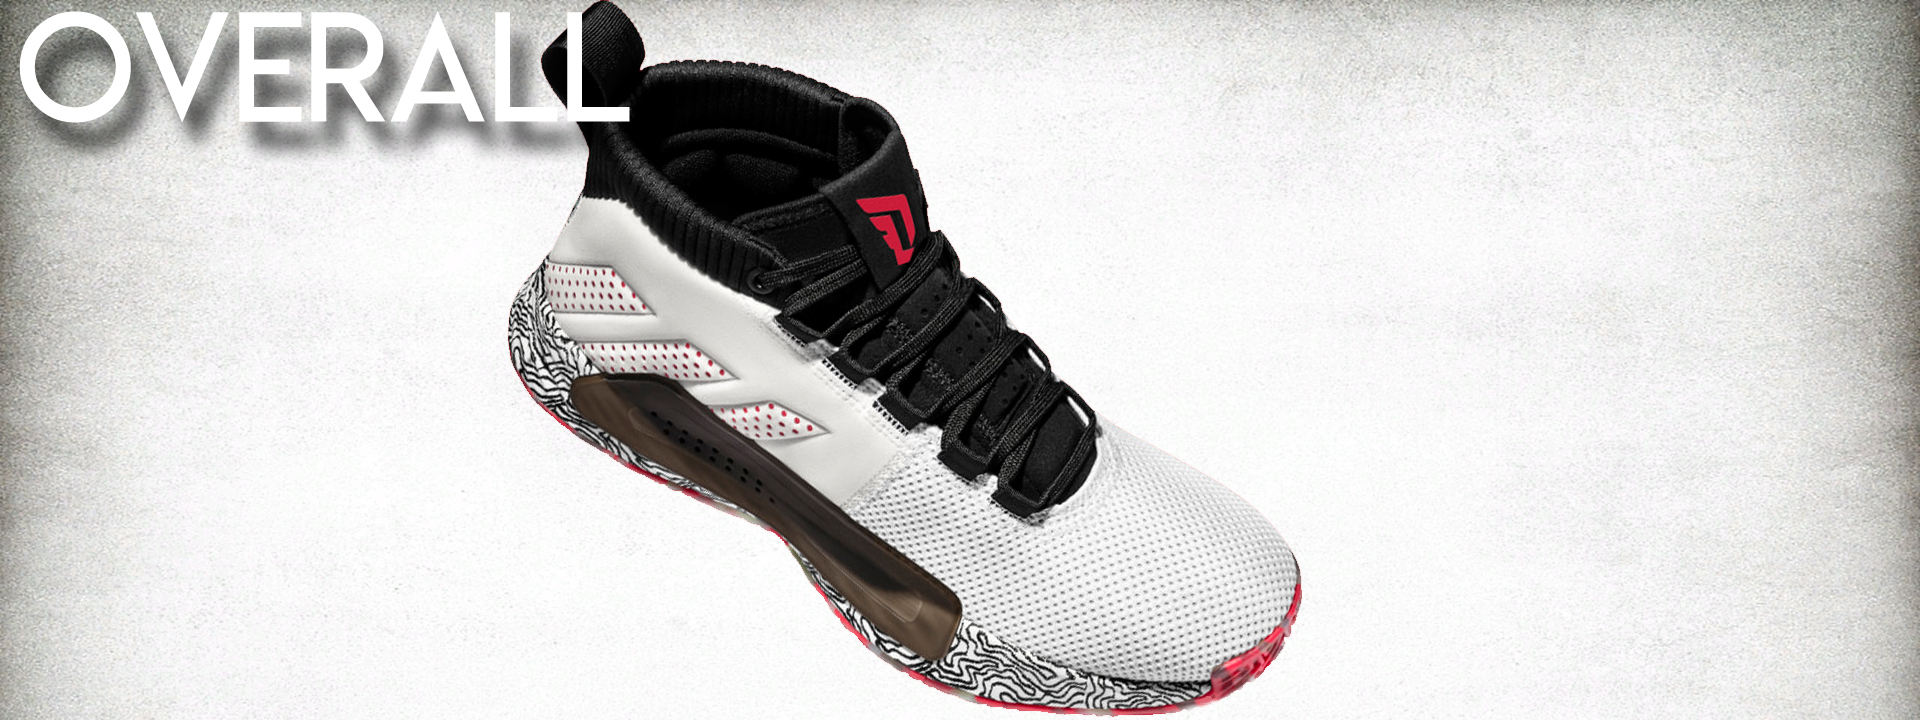 dame 5 basketball shoes review